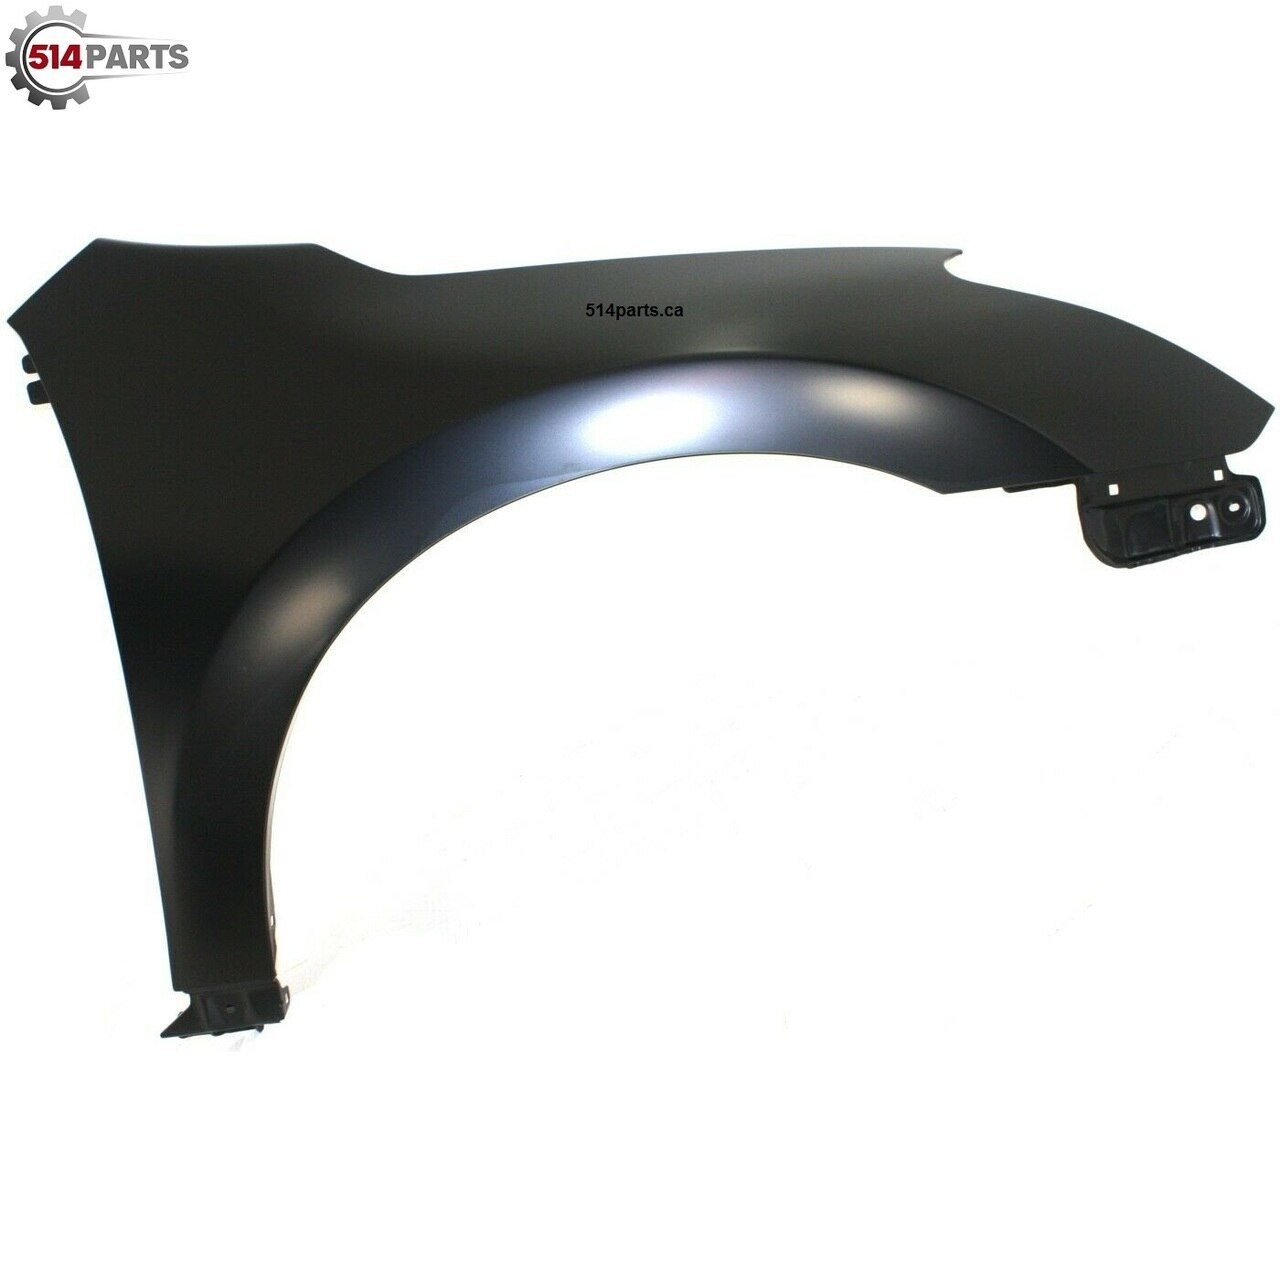 2008 - 2011 NISSAN ALTIMA COUPE FENDERS - AILES